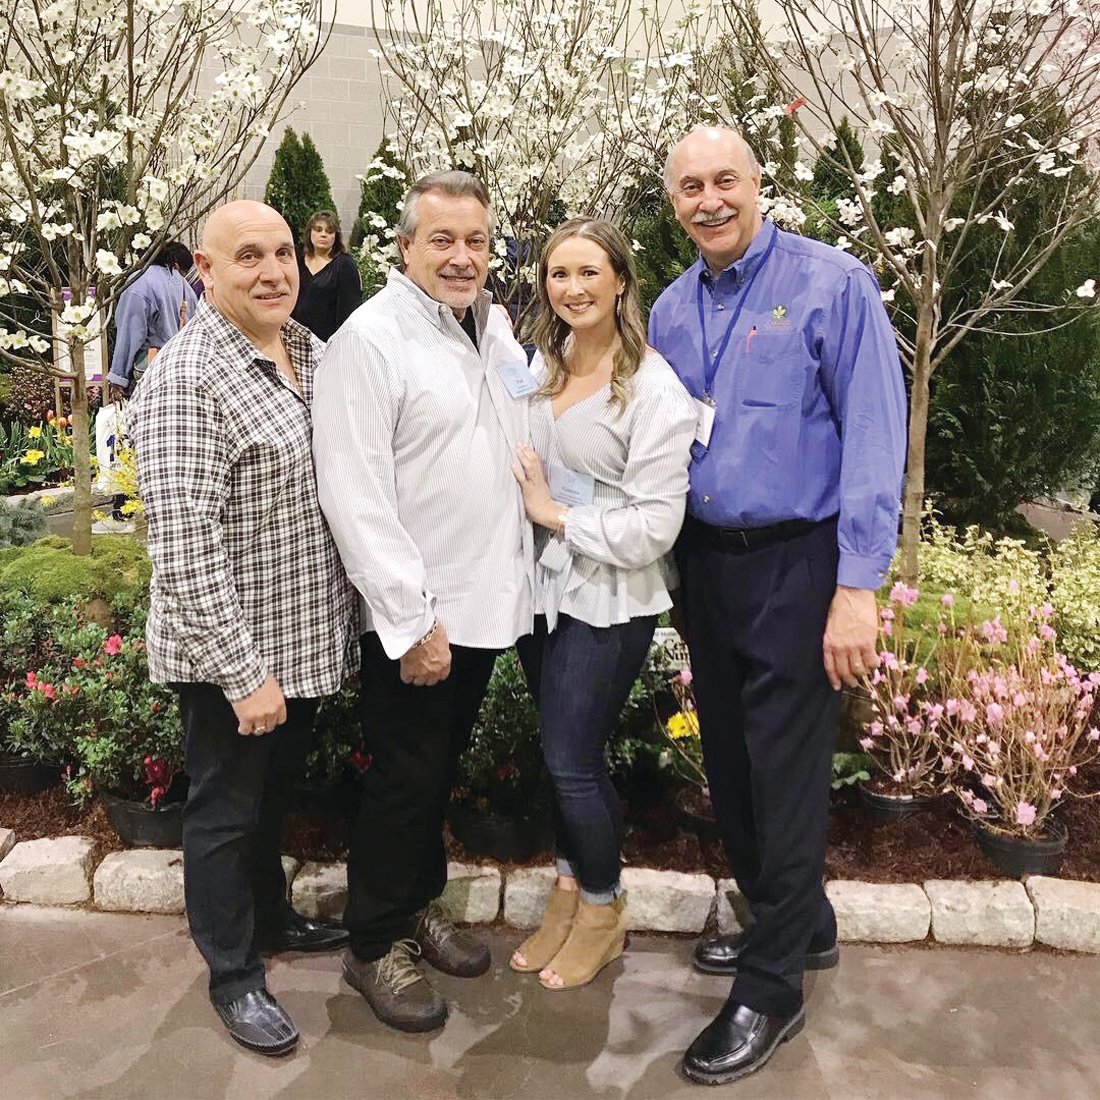 FAMILY-OWNED BUSINESS: Central Nurseries of Johnston will put on the “Gardens of the World” self-guided tour at this year’s RI Home Show. (Left to right) Steven, Paul, Gianna and James Pagliarini.